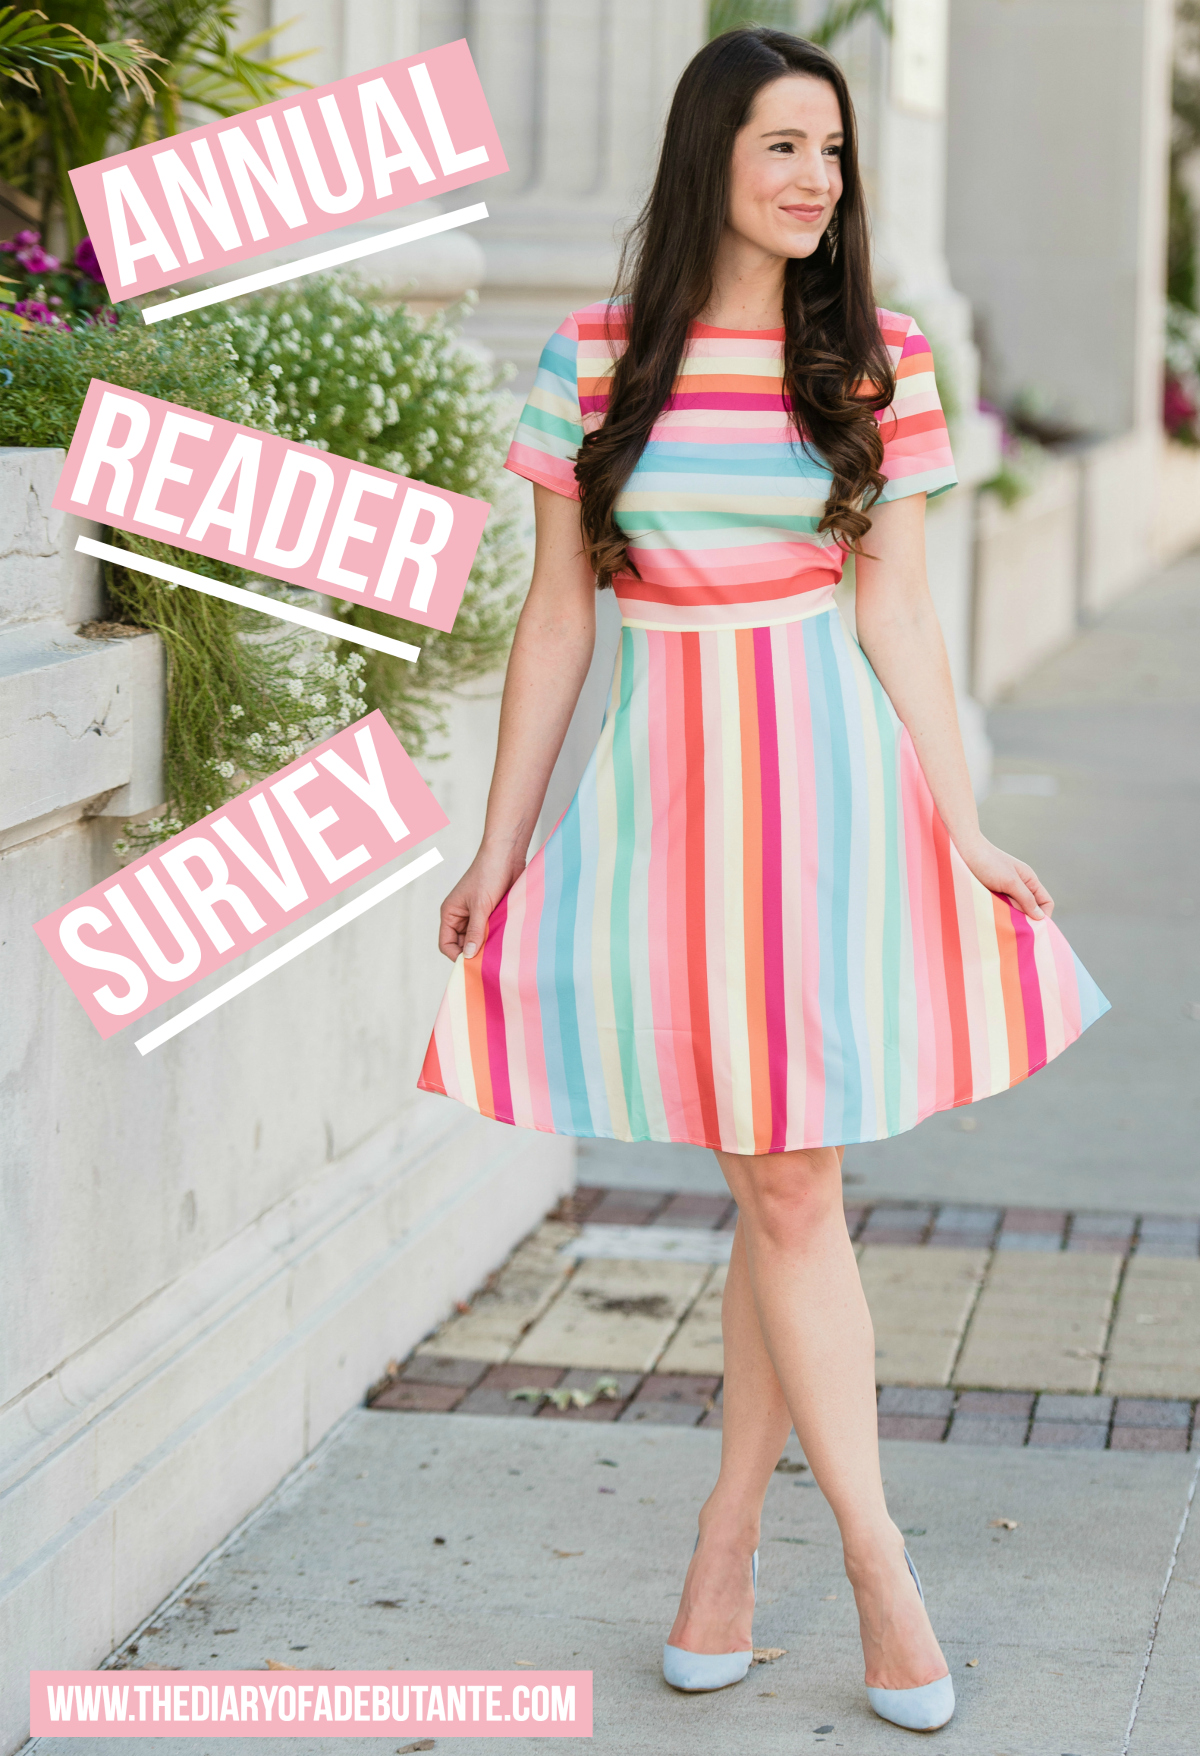 Diary of a Debutante's annual reader feedback survey and top ten posts of 2017 by fashion blogger Stephanie Ziajka from Diary of a Debutante